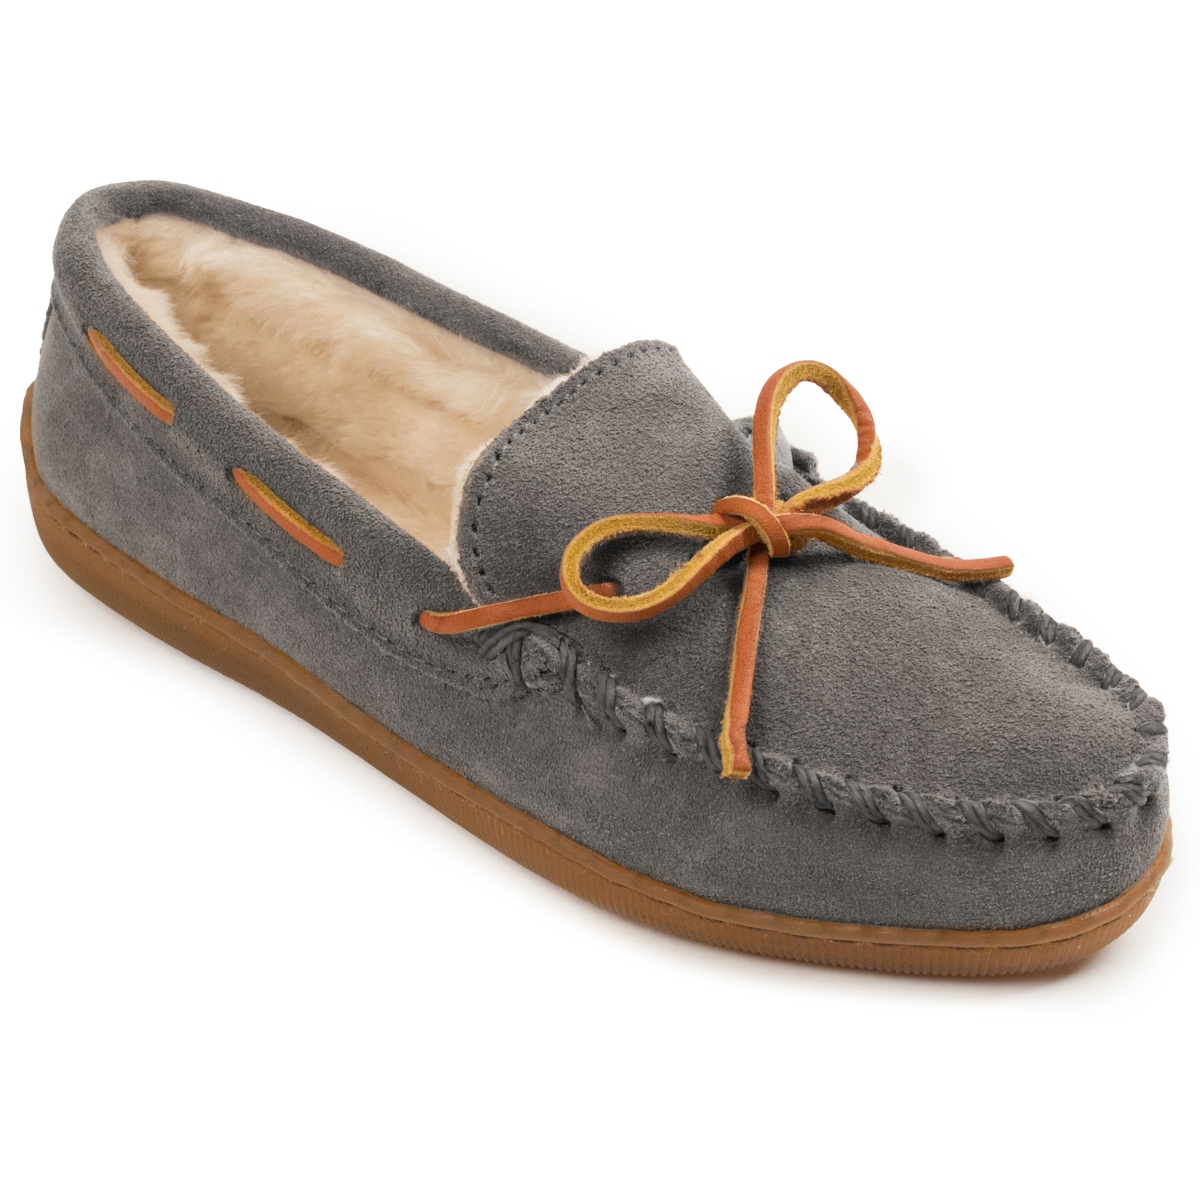 Women's Suede Pile Lined Hardsole Slippers - Charcoal